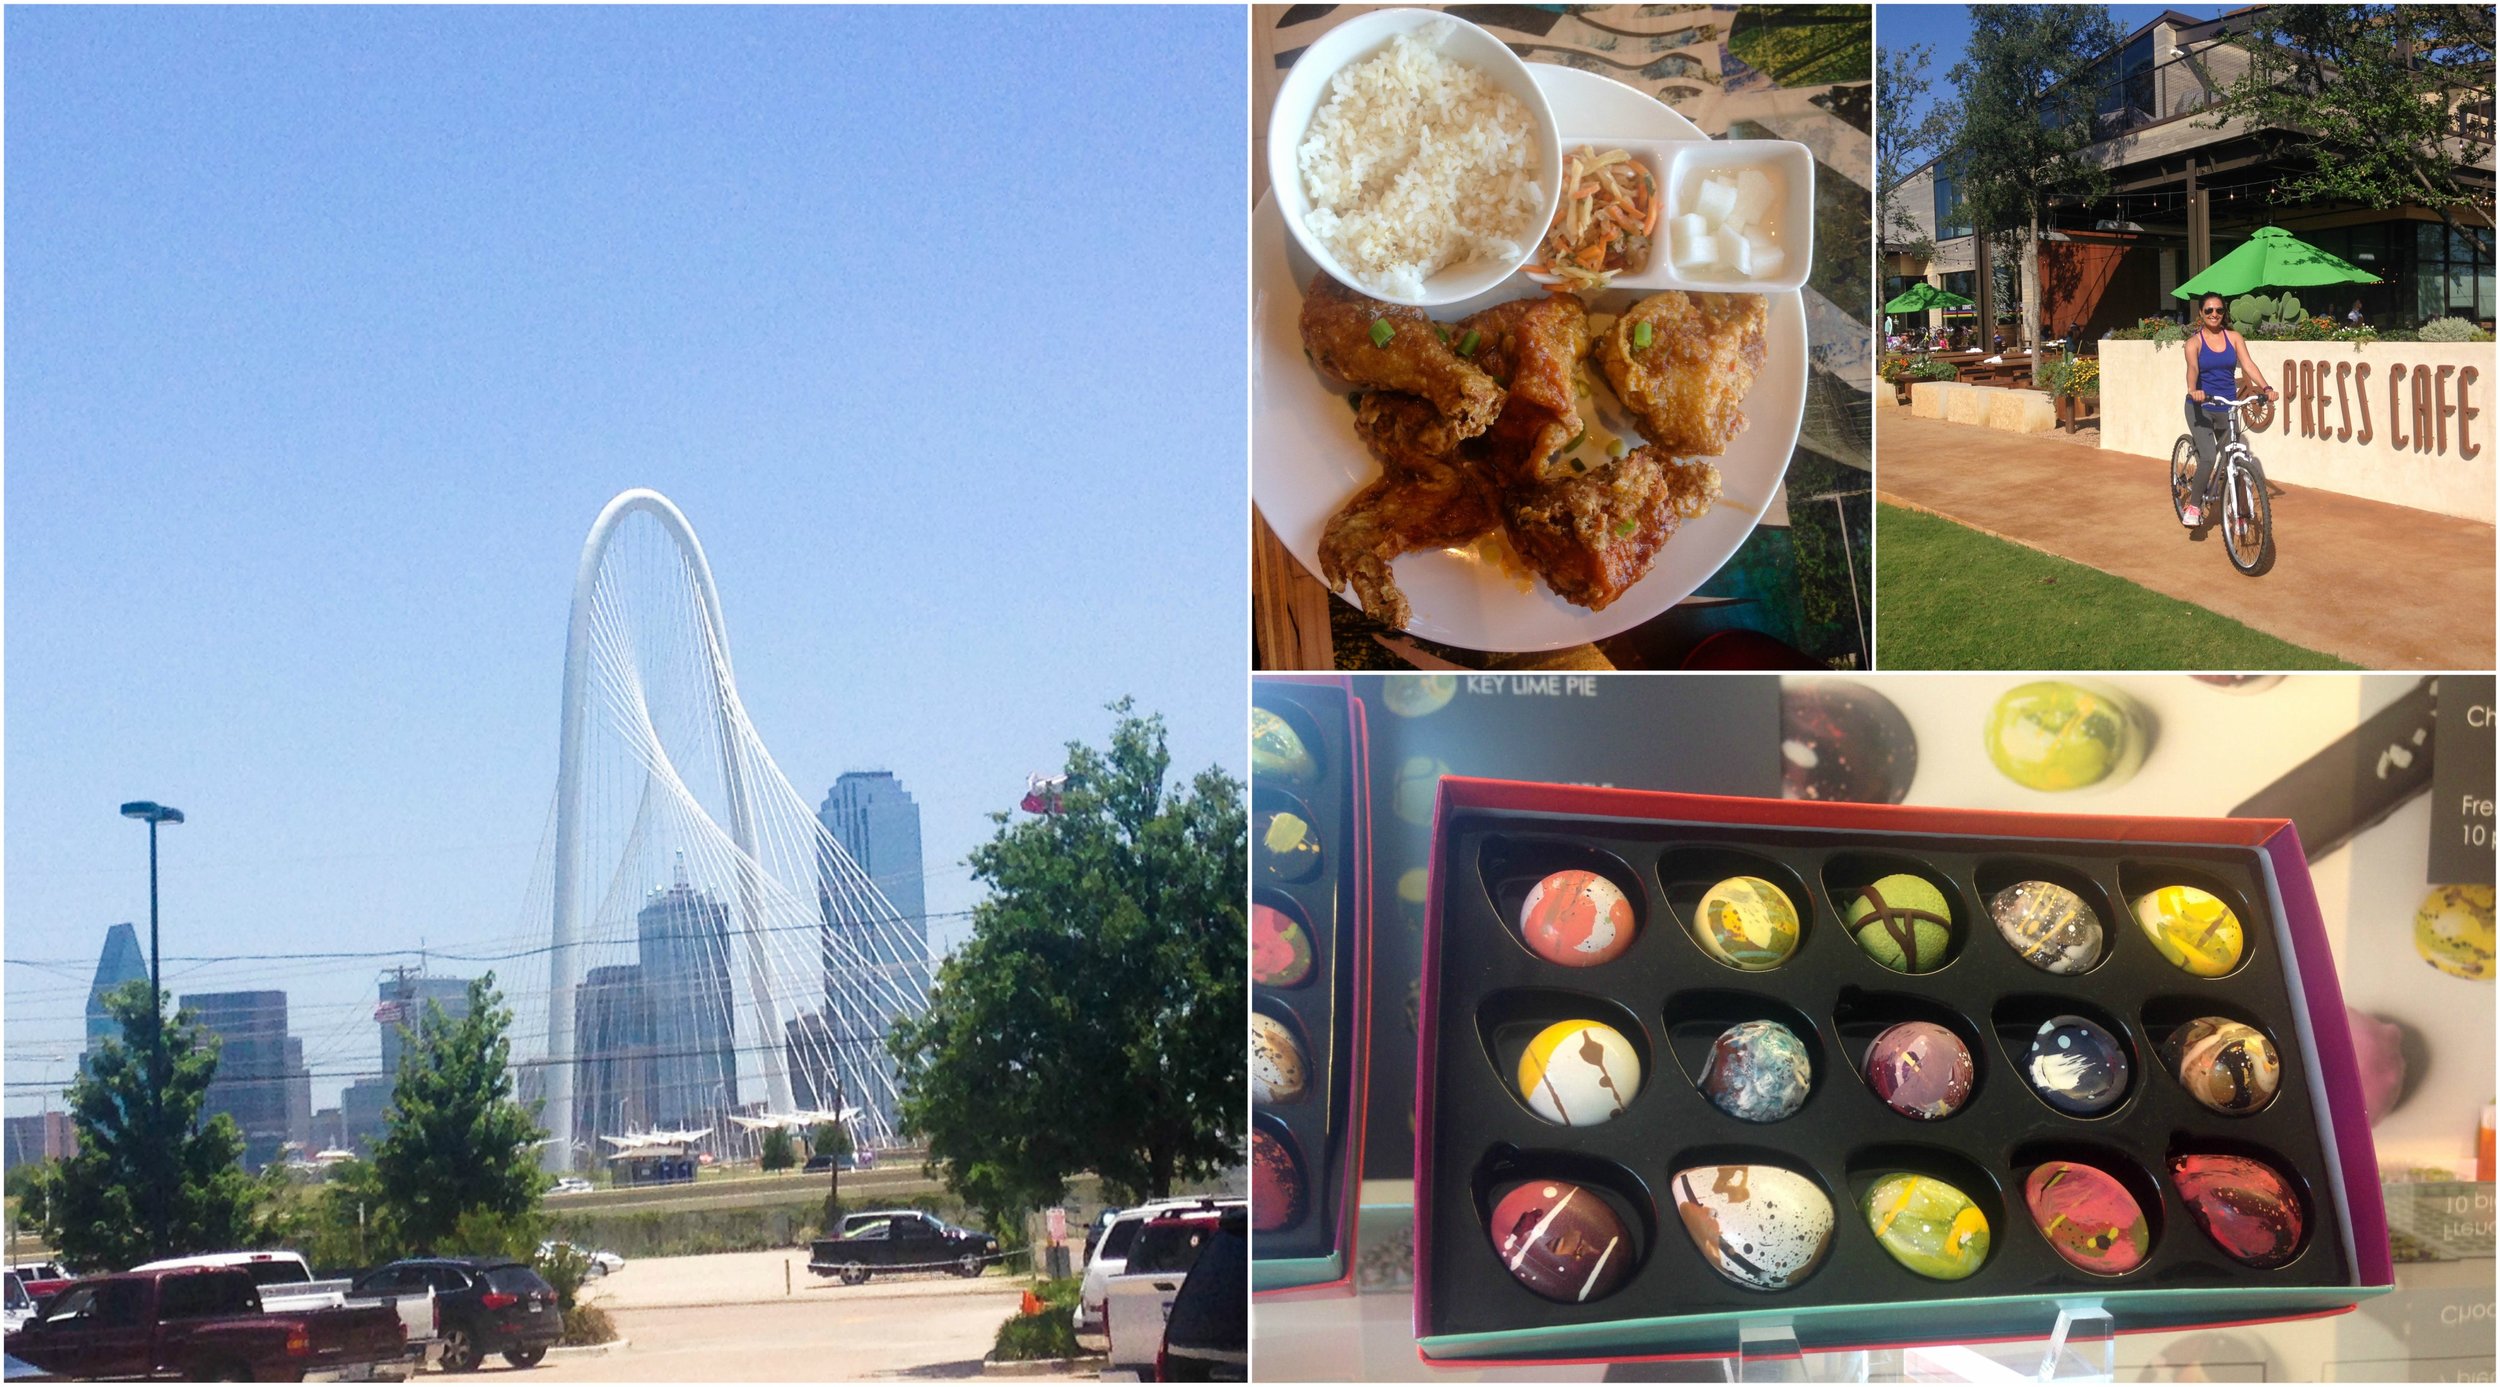 Sharing 10 Fun Staycation Ideas in DFW for everyone to enjoy including restaurants, outdoor activities, and relaxation.